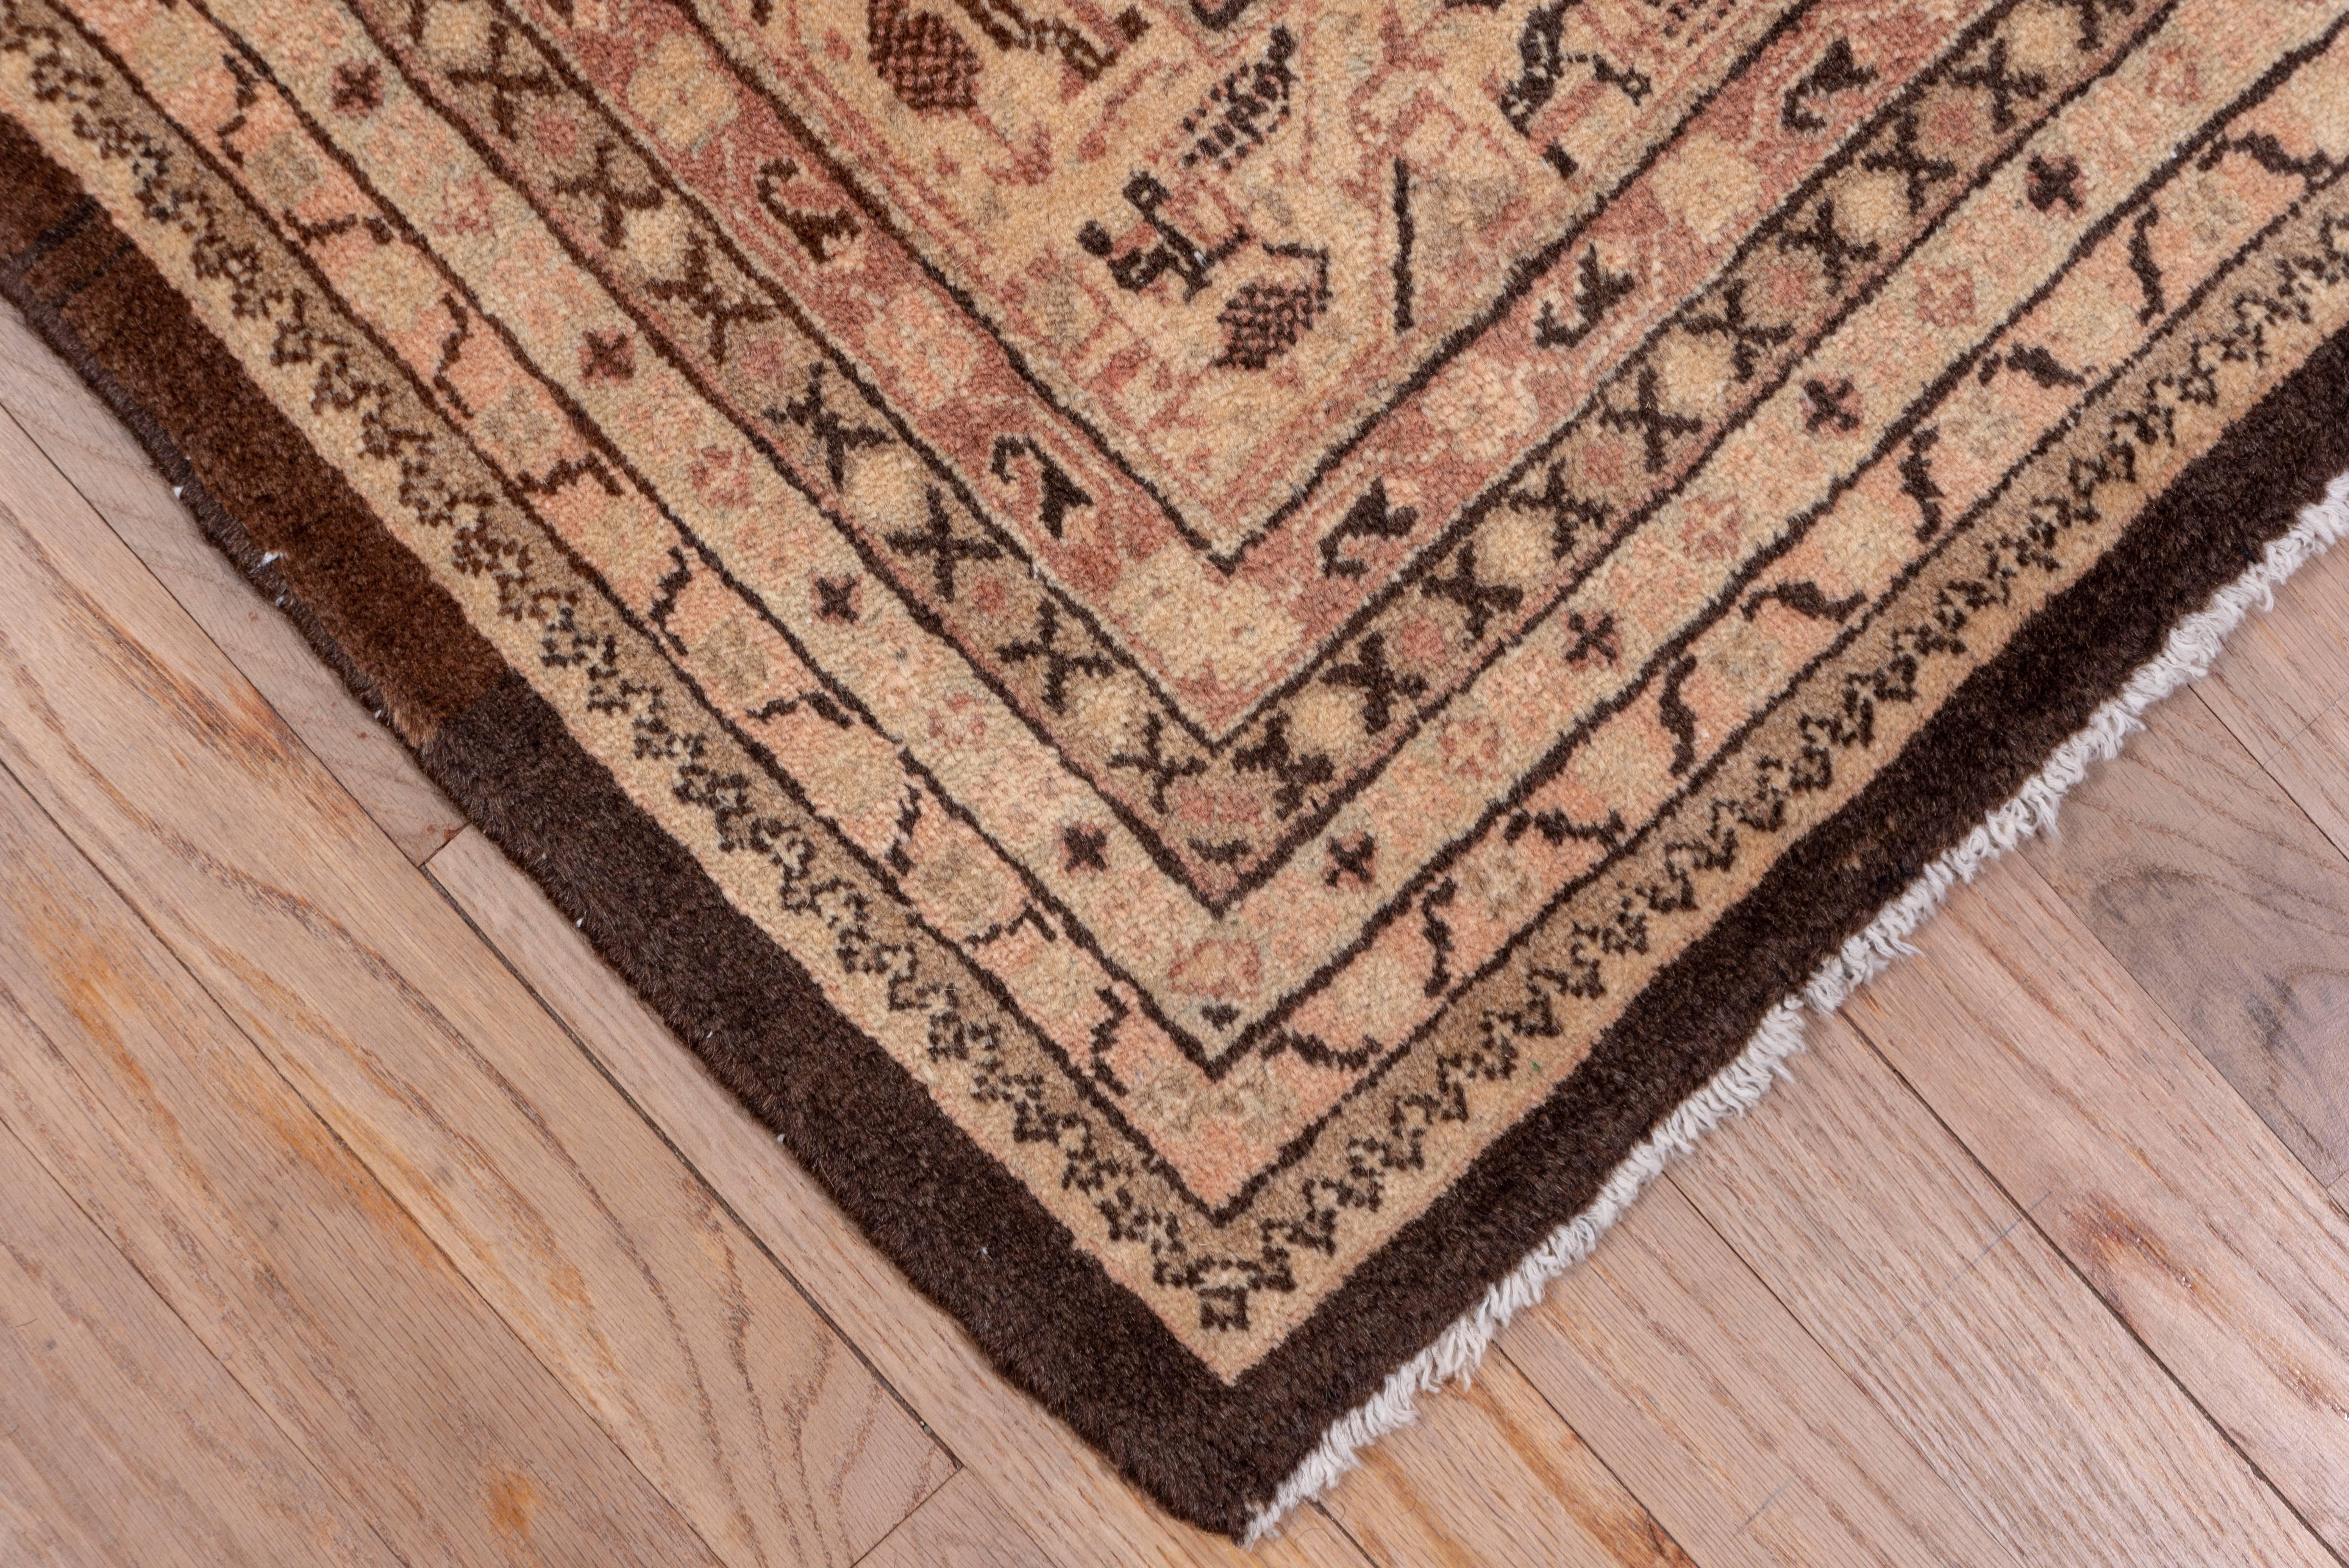 In the Saraband style, this west Persian urban carpet has a brown field with numerous half drop rows of tiny angular bottehs, and a border system with a central old ivory band with an angular vine and hanging bottehs. There are eight further